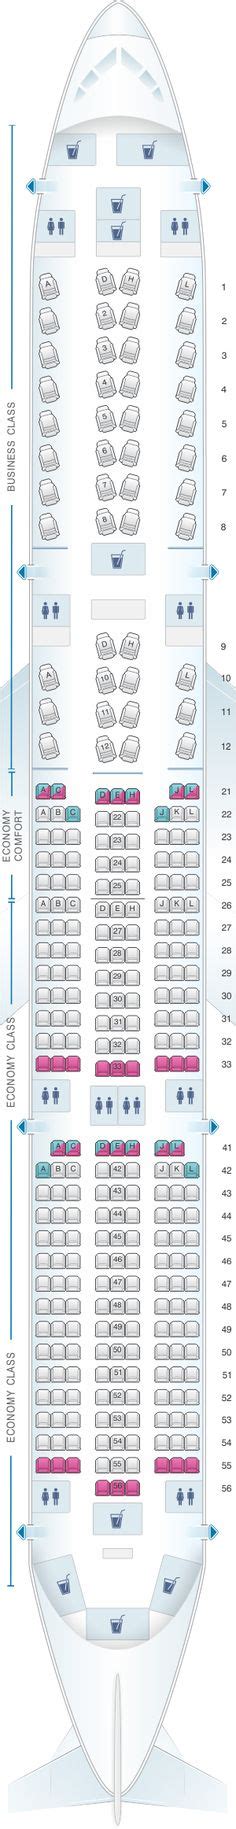 Seat Map Finnair Airbus A350 900 Config1 Airline Words Location Map